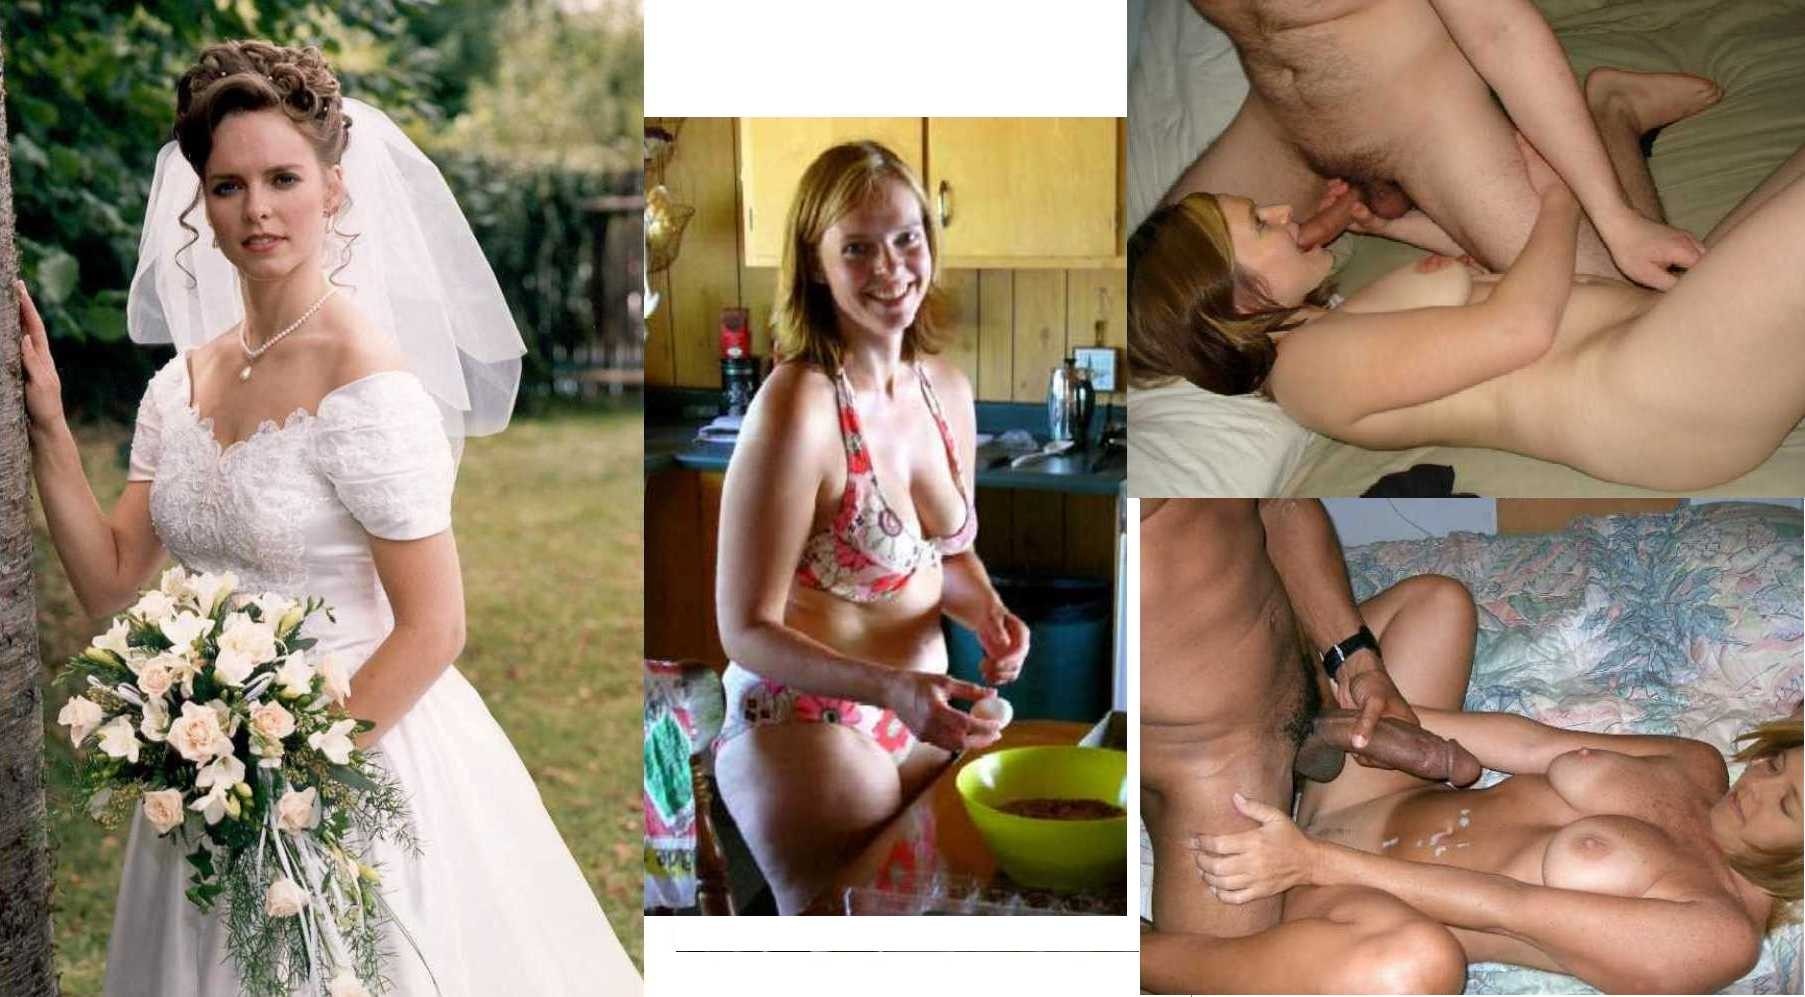 Russian Sex After Marriage (60 photos) picture